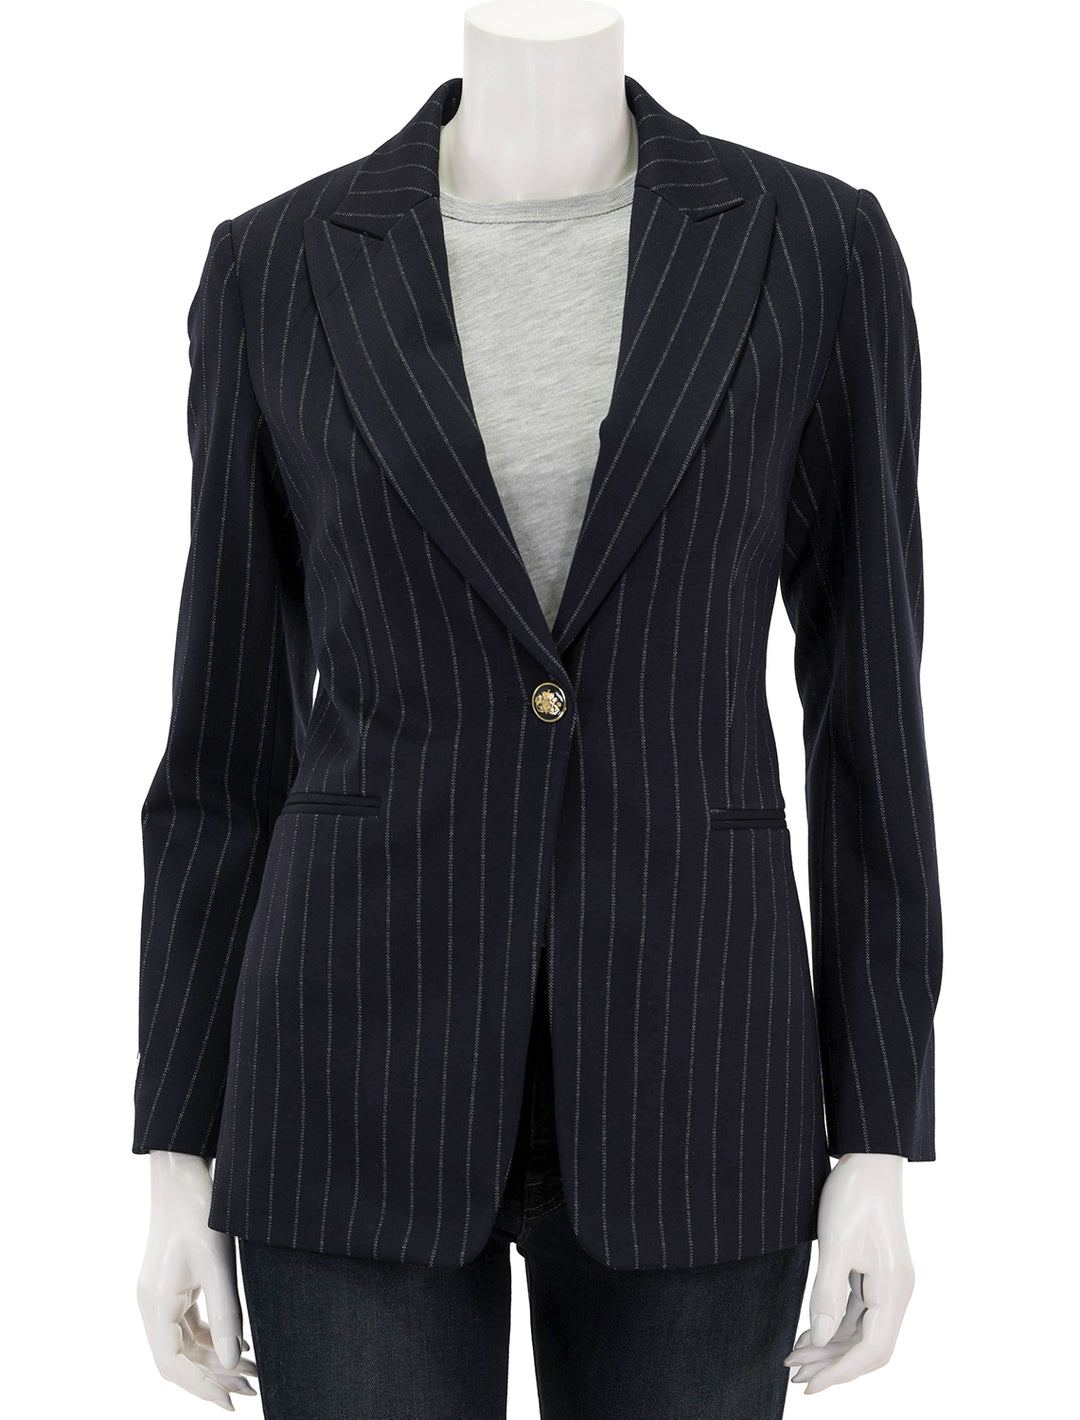 Front view of Vilagallo's katrina embroidered pinstripe knit blazer, buttoned.